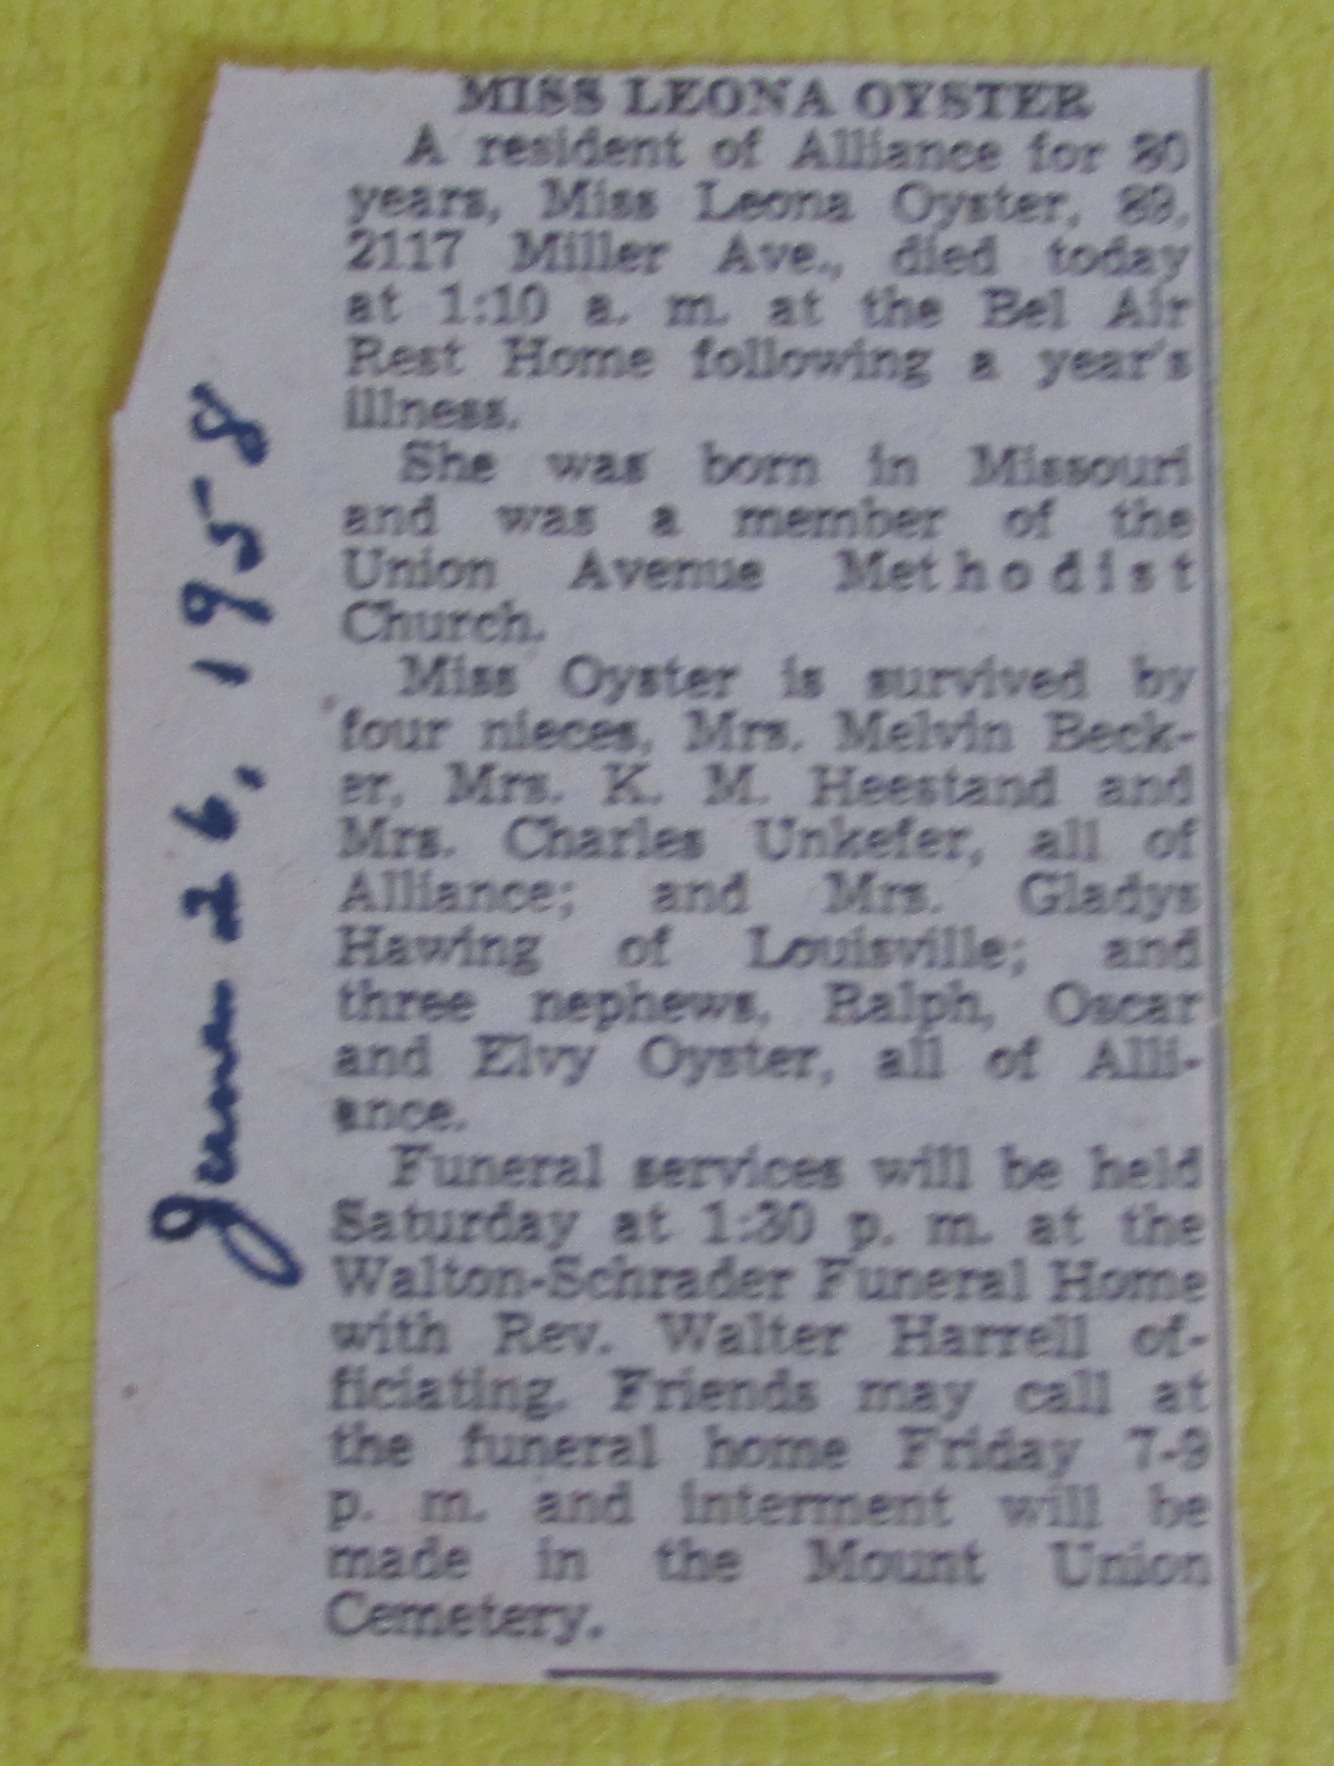 1958 Clipping about Leona Oyster